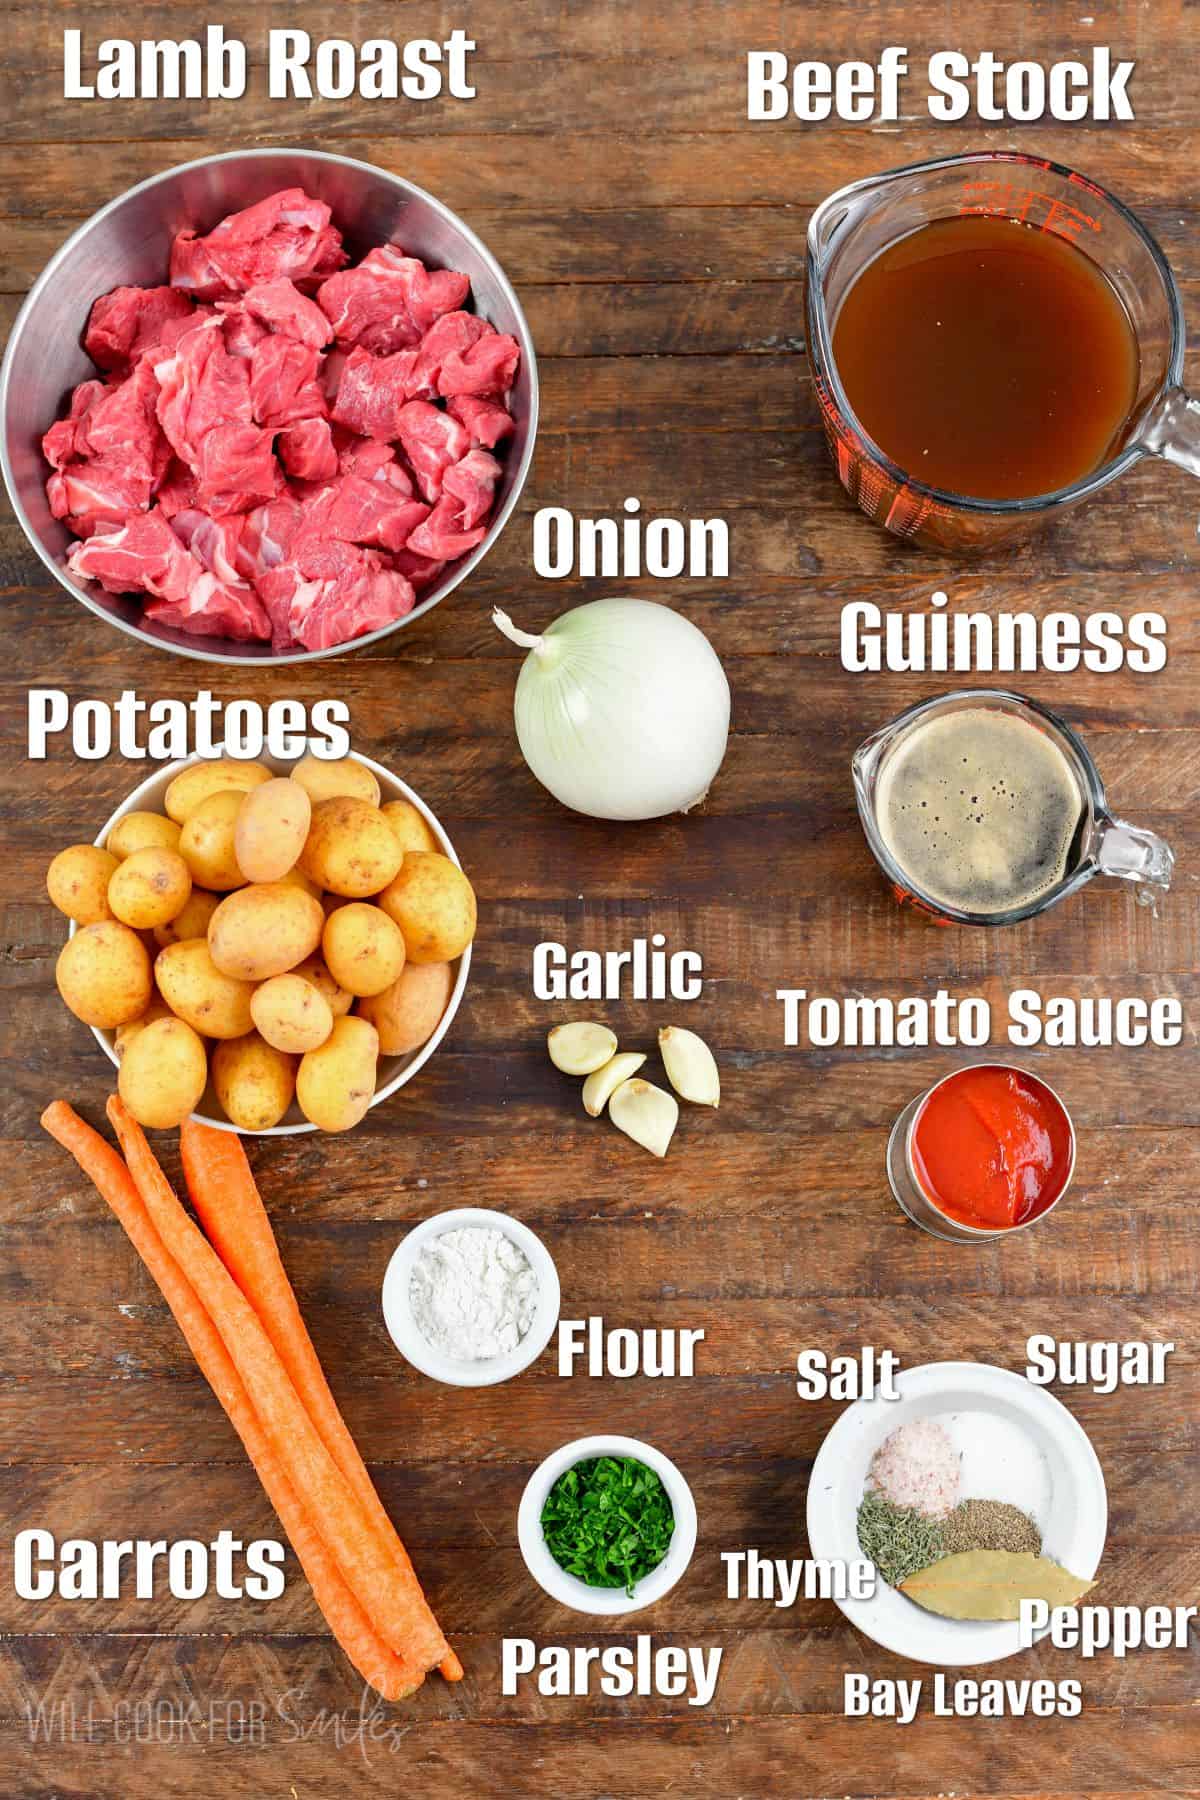 Labeled ingredients for Irish beef strew on a wood surface.